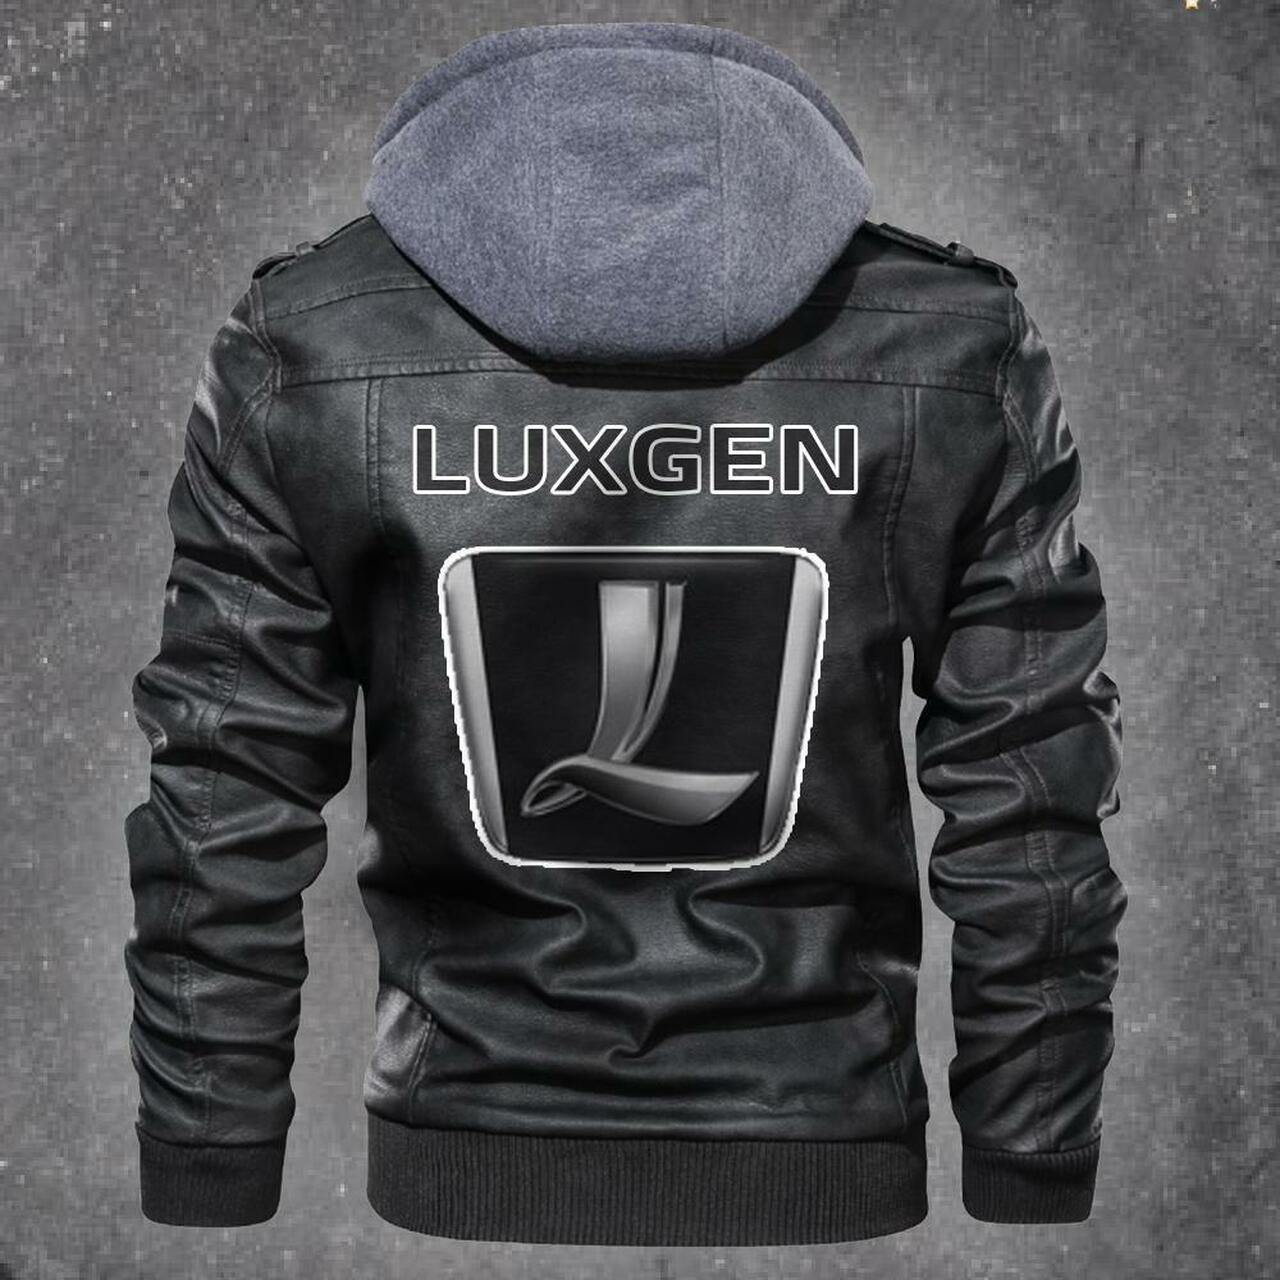 You can find a good leather jacket by access our website 121